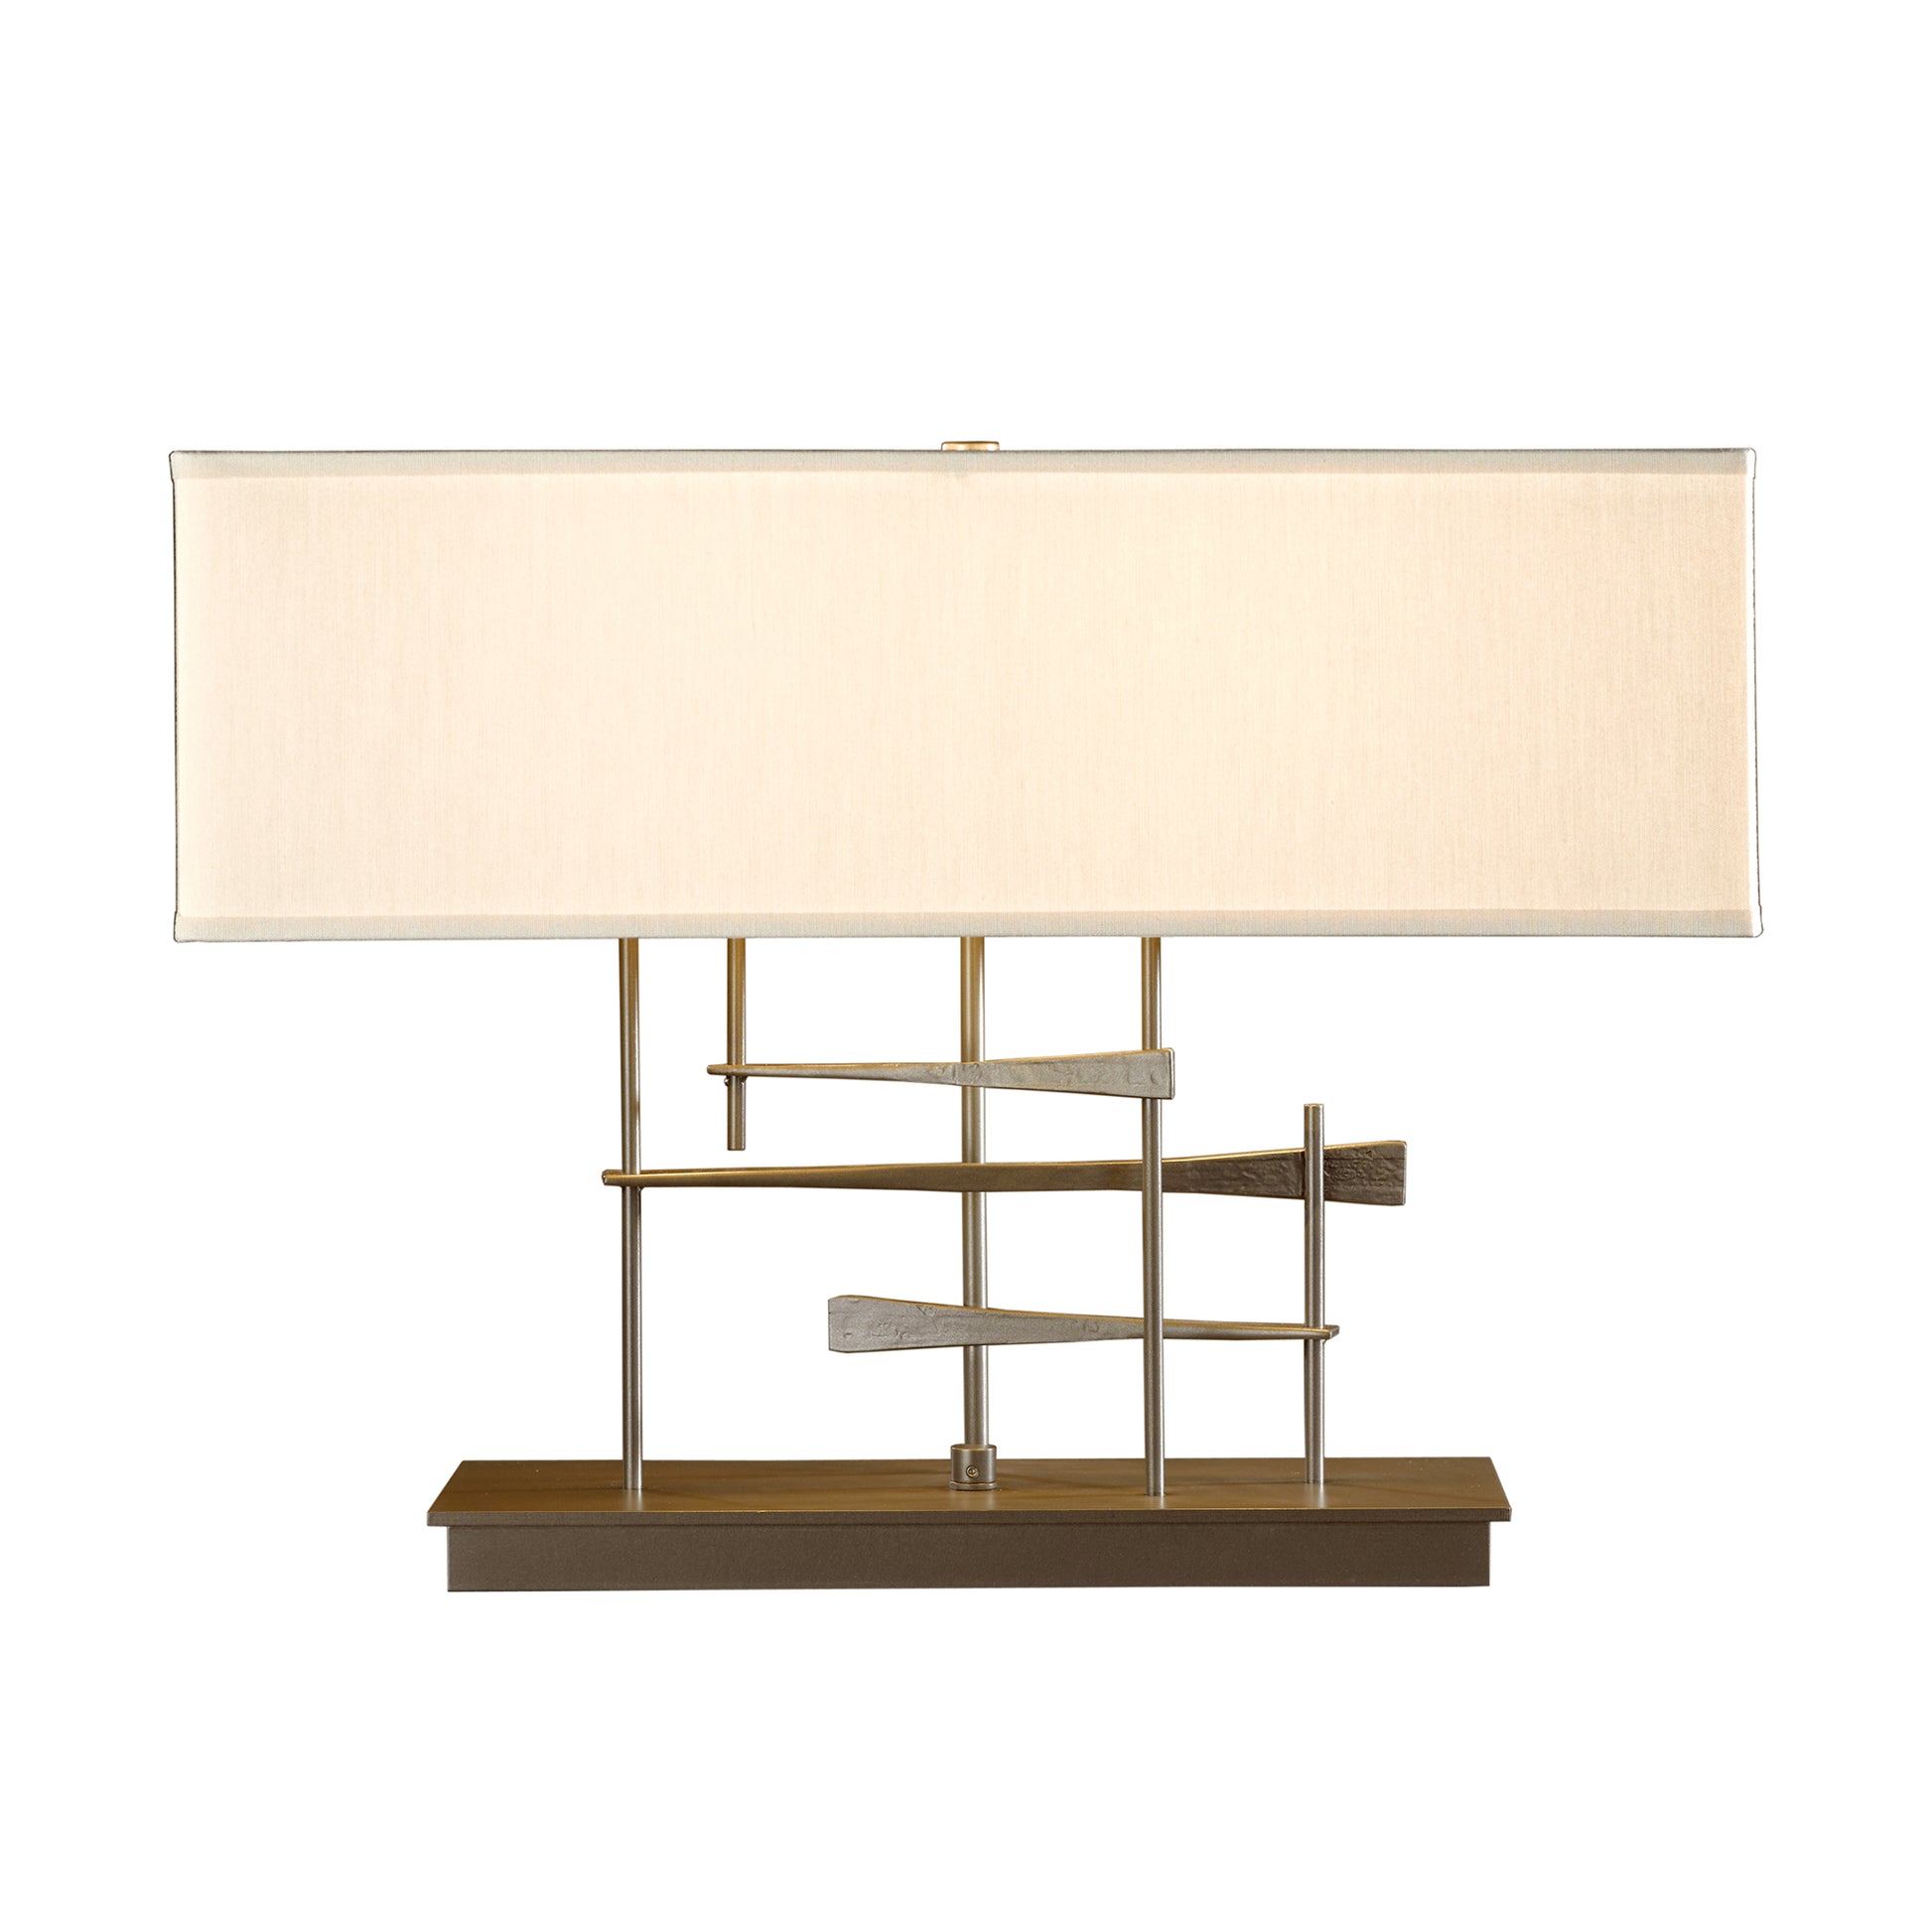 A modern Cavaletti table lamp with a rectangular off-white shade and a hand-forged wrought iron base in a gold and brown geometric pattern, isolated on a white background by Hubbardton Forge.